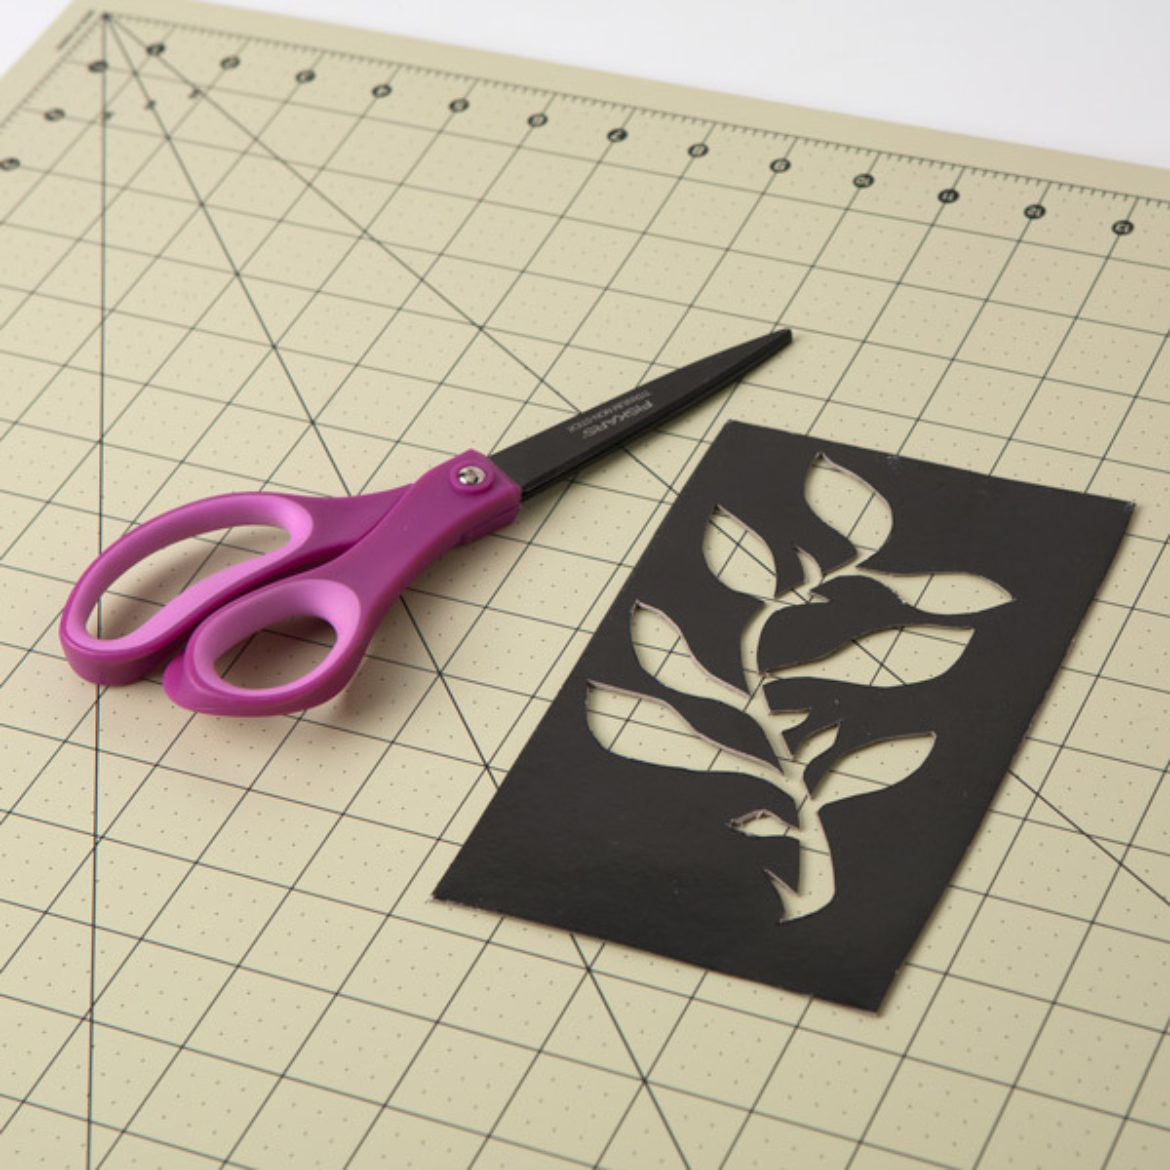 Floral design traced onto cardstock and cut out with scissors to serve as a template